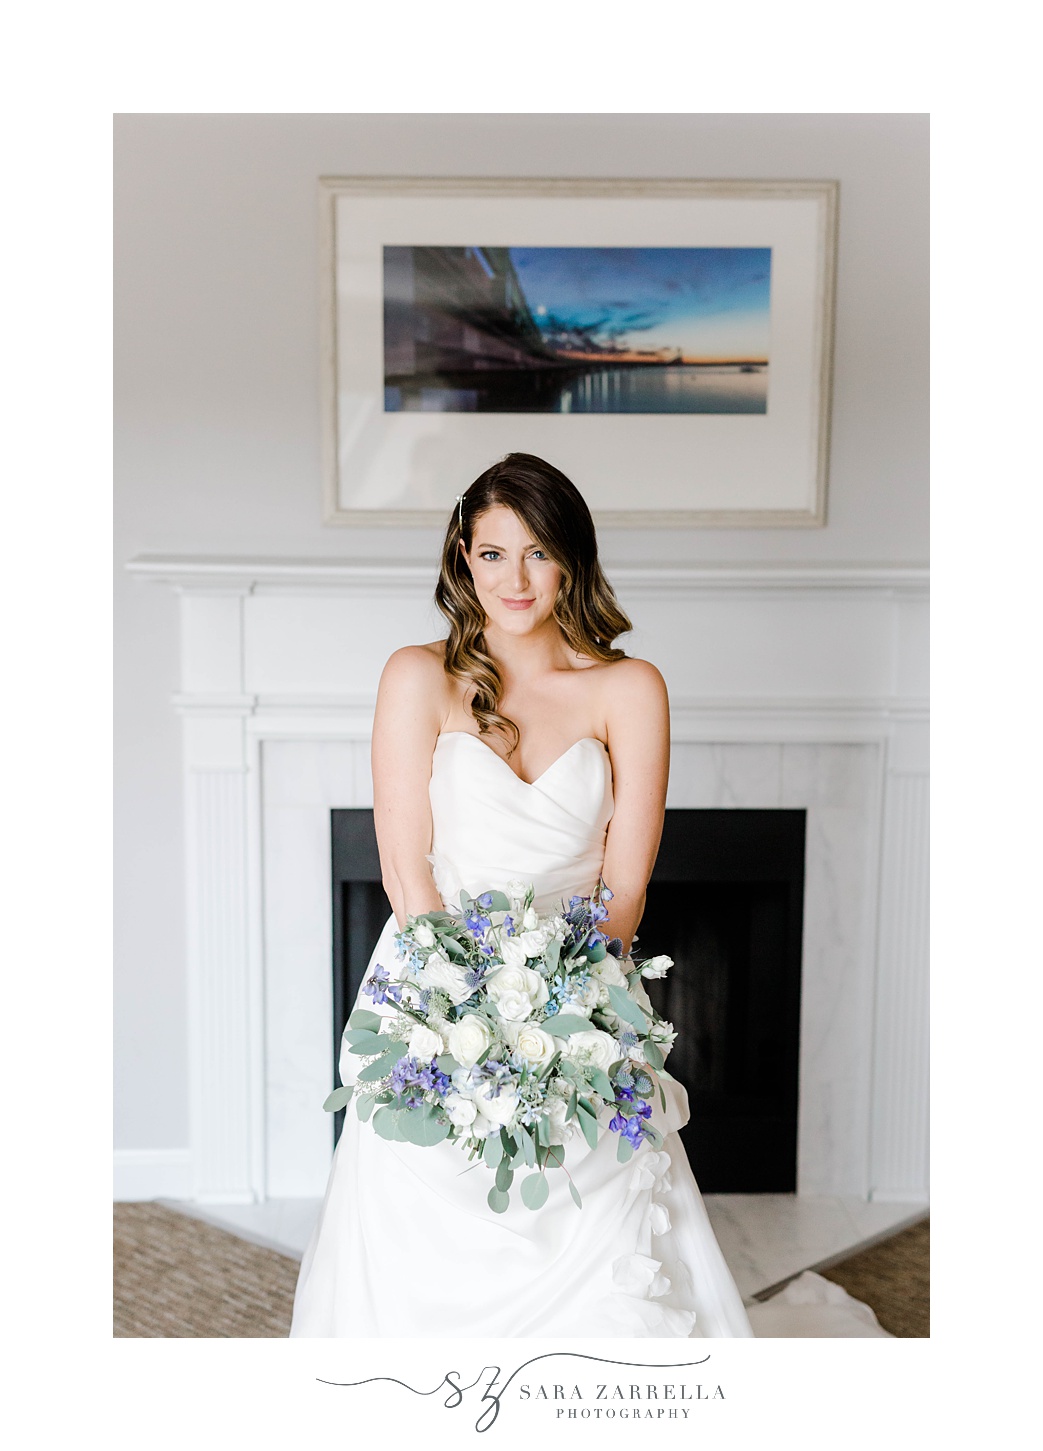 bride stands in front of fireplace holding bouquet of purple and white flowers